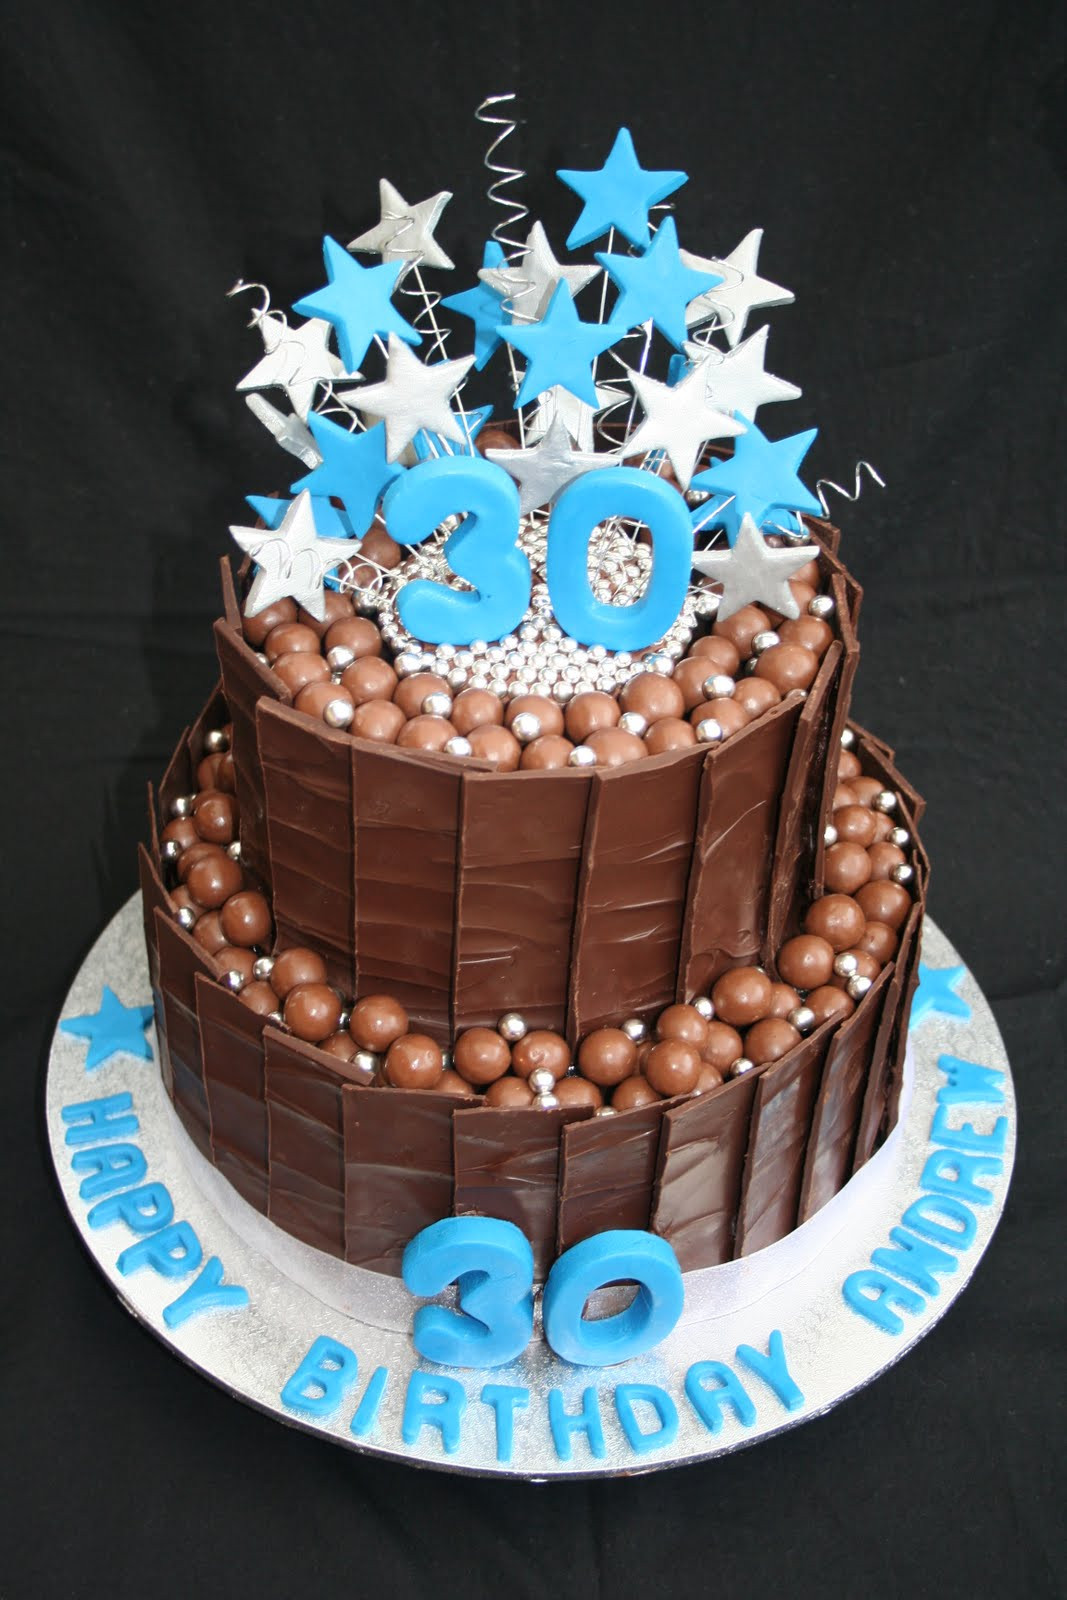 30th Birthday Cake Ideas For Him
 Leonie s Cakes and Parties 30th Birthday Cake